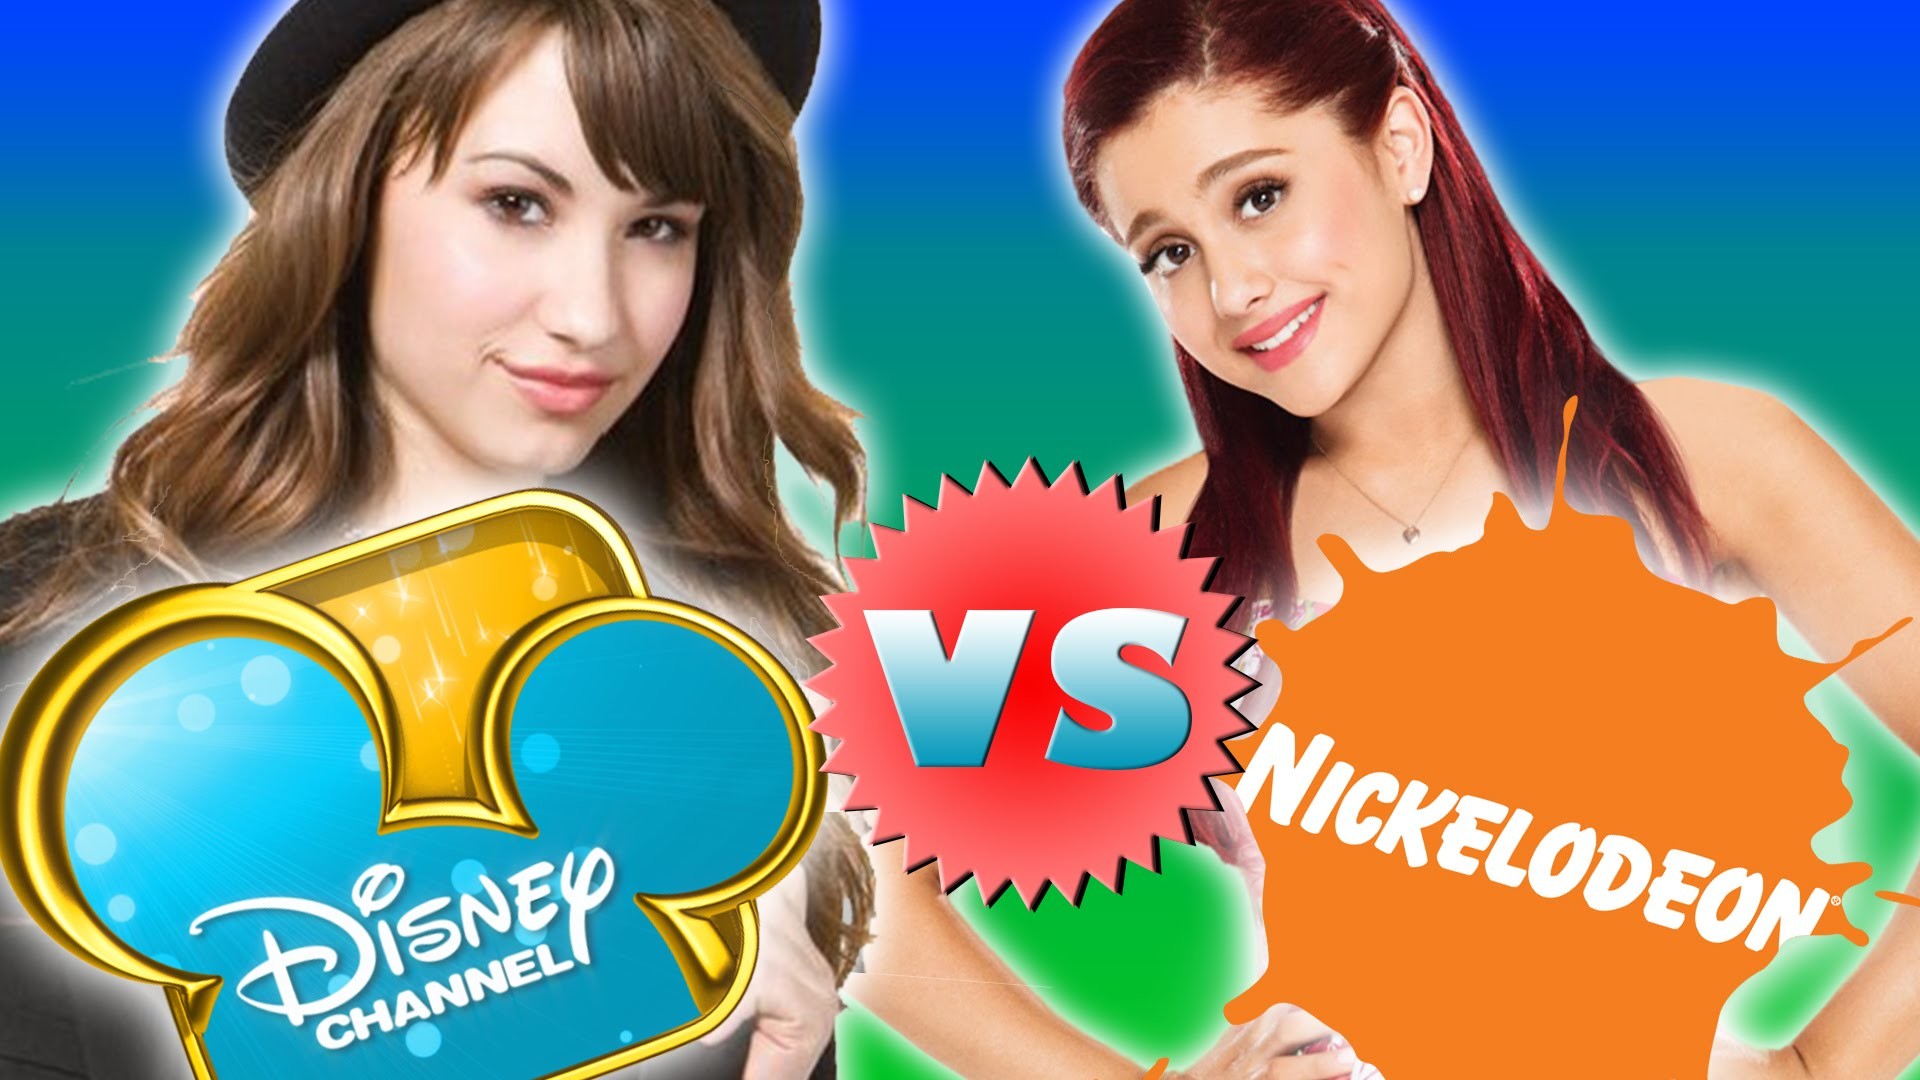 1920x1080 Are you more Disney Channel or Nickelodeon?? - YouTube